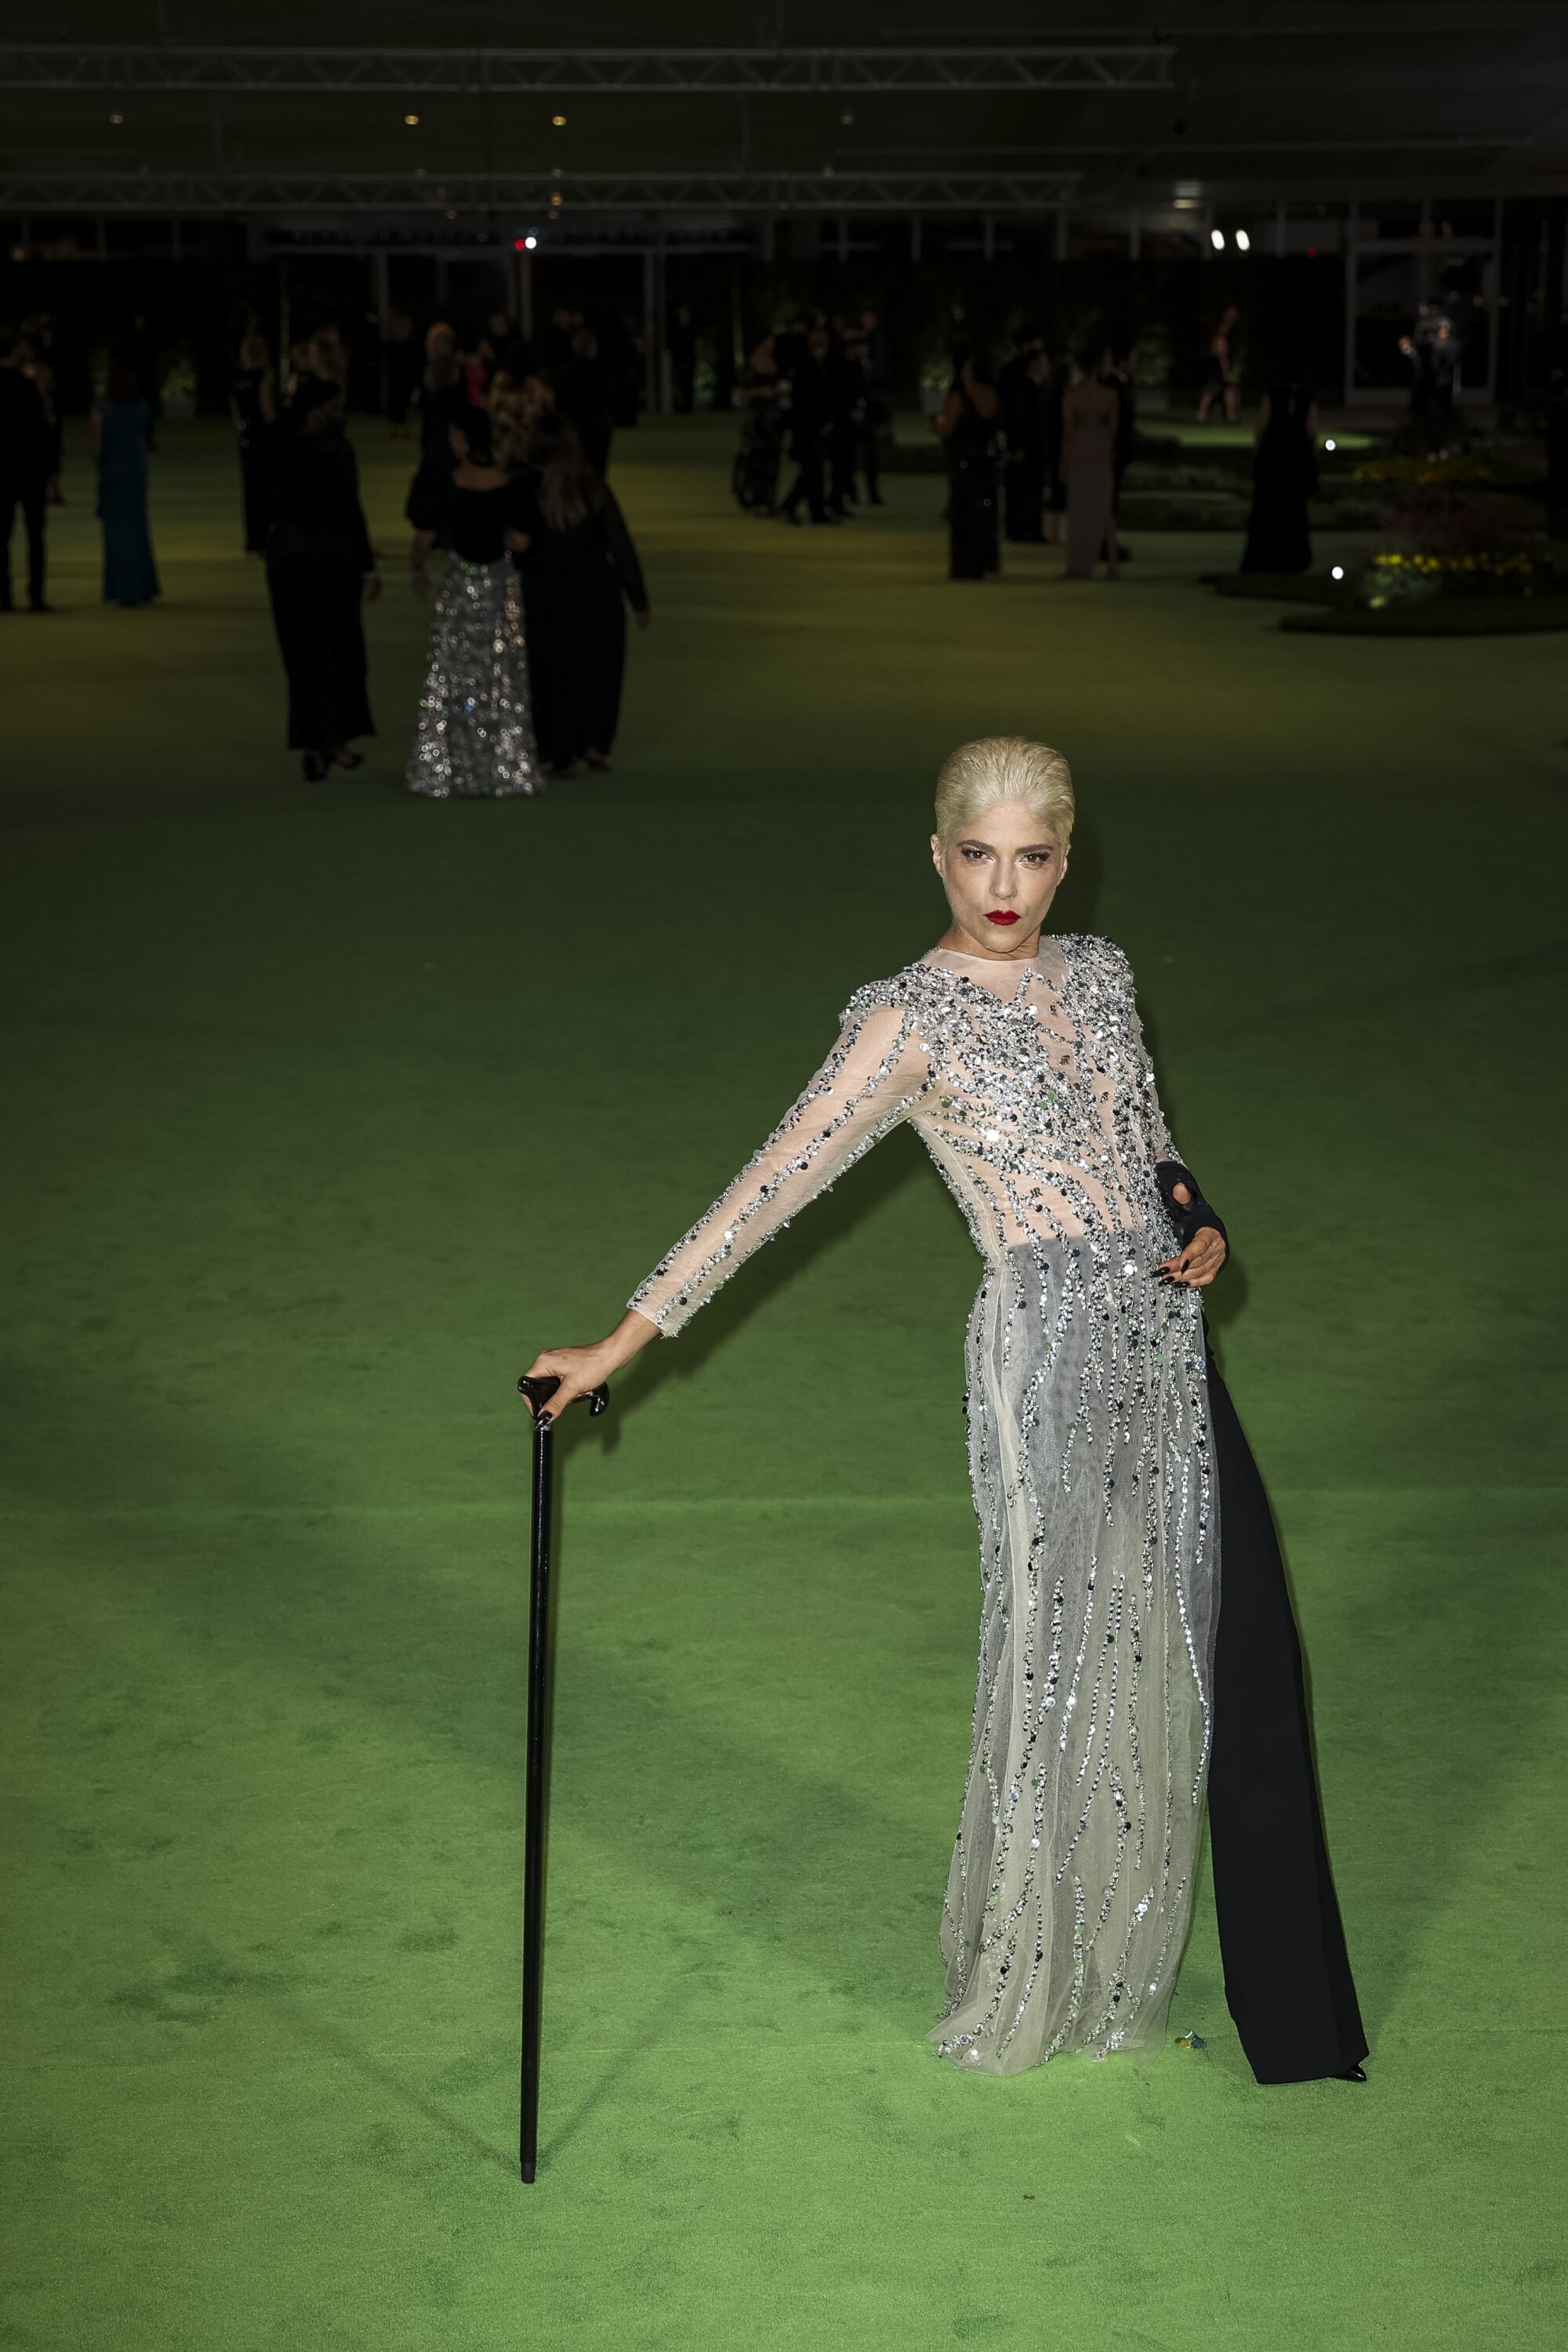 A woman in a silver dress and black pants posing with a cane on a green carpet